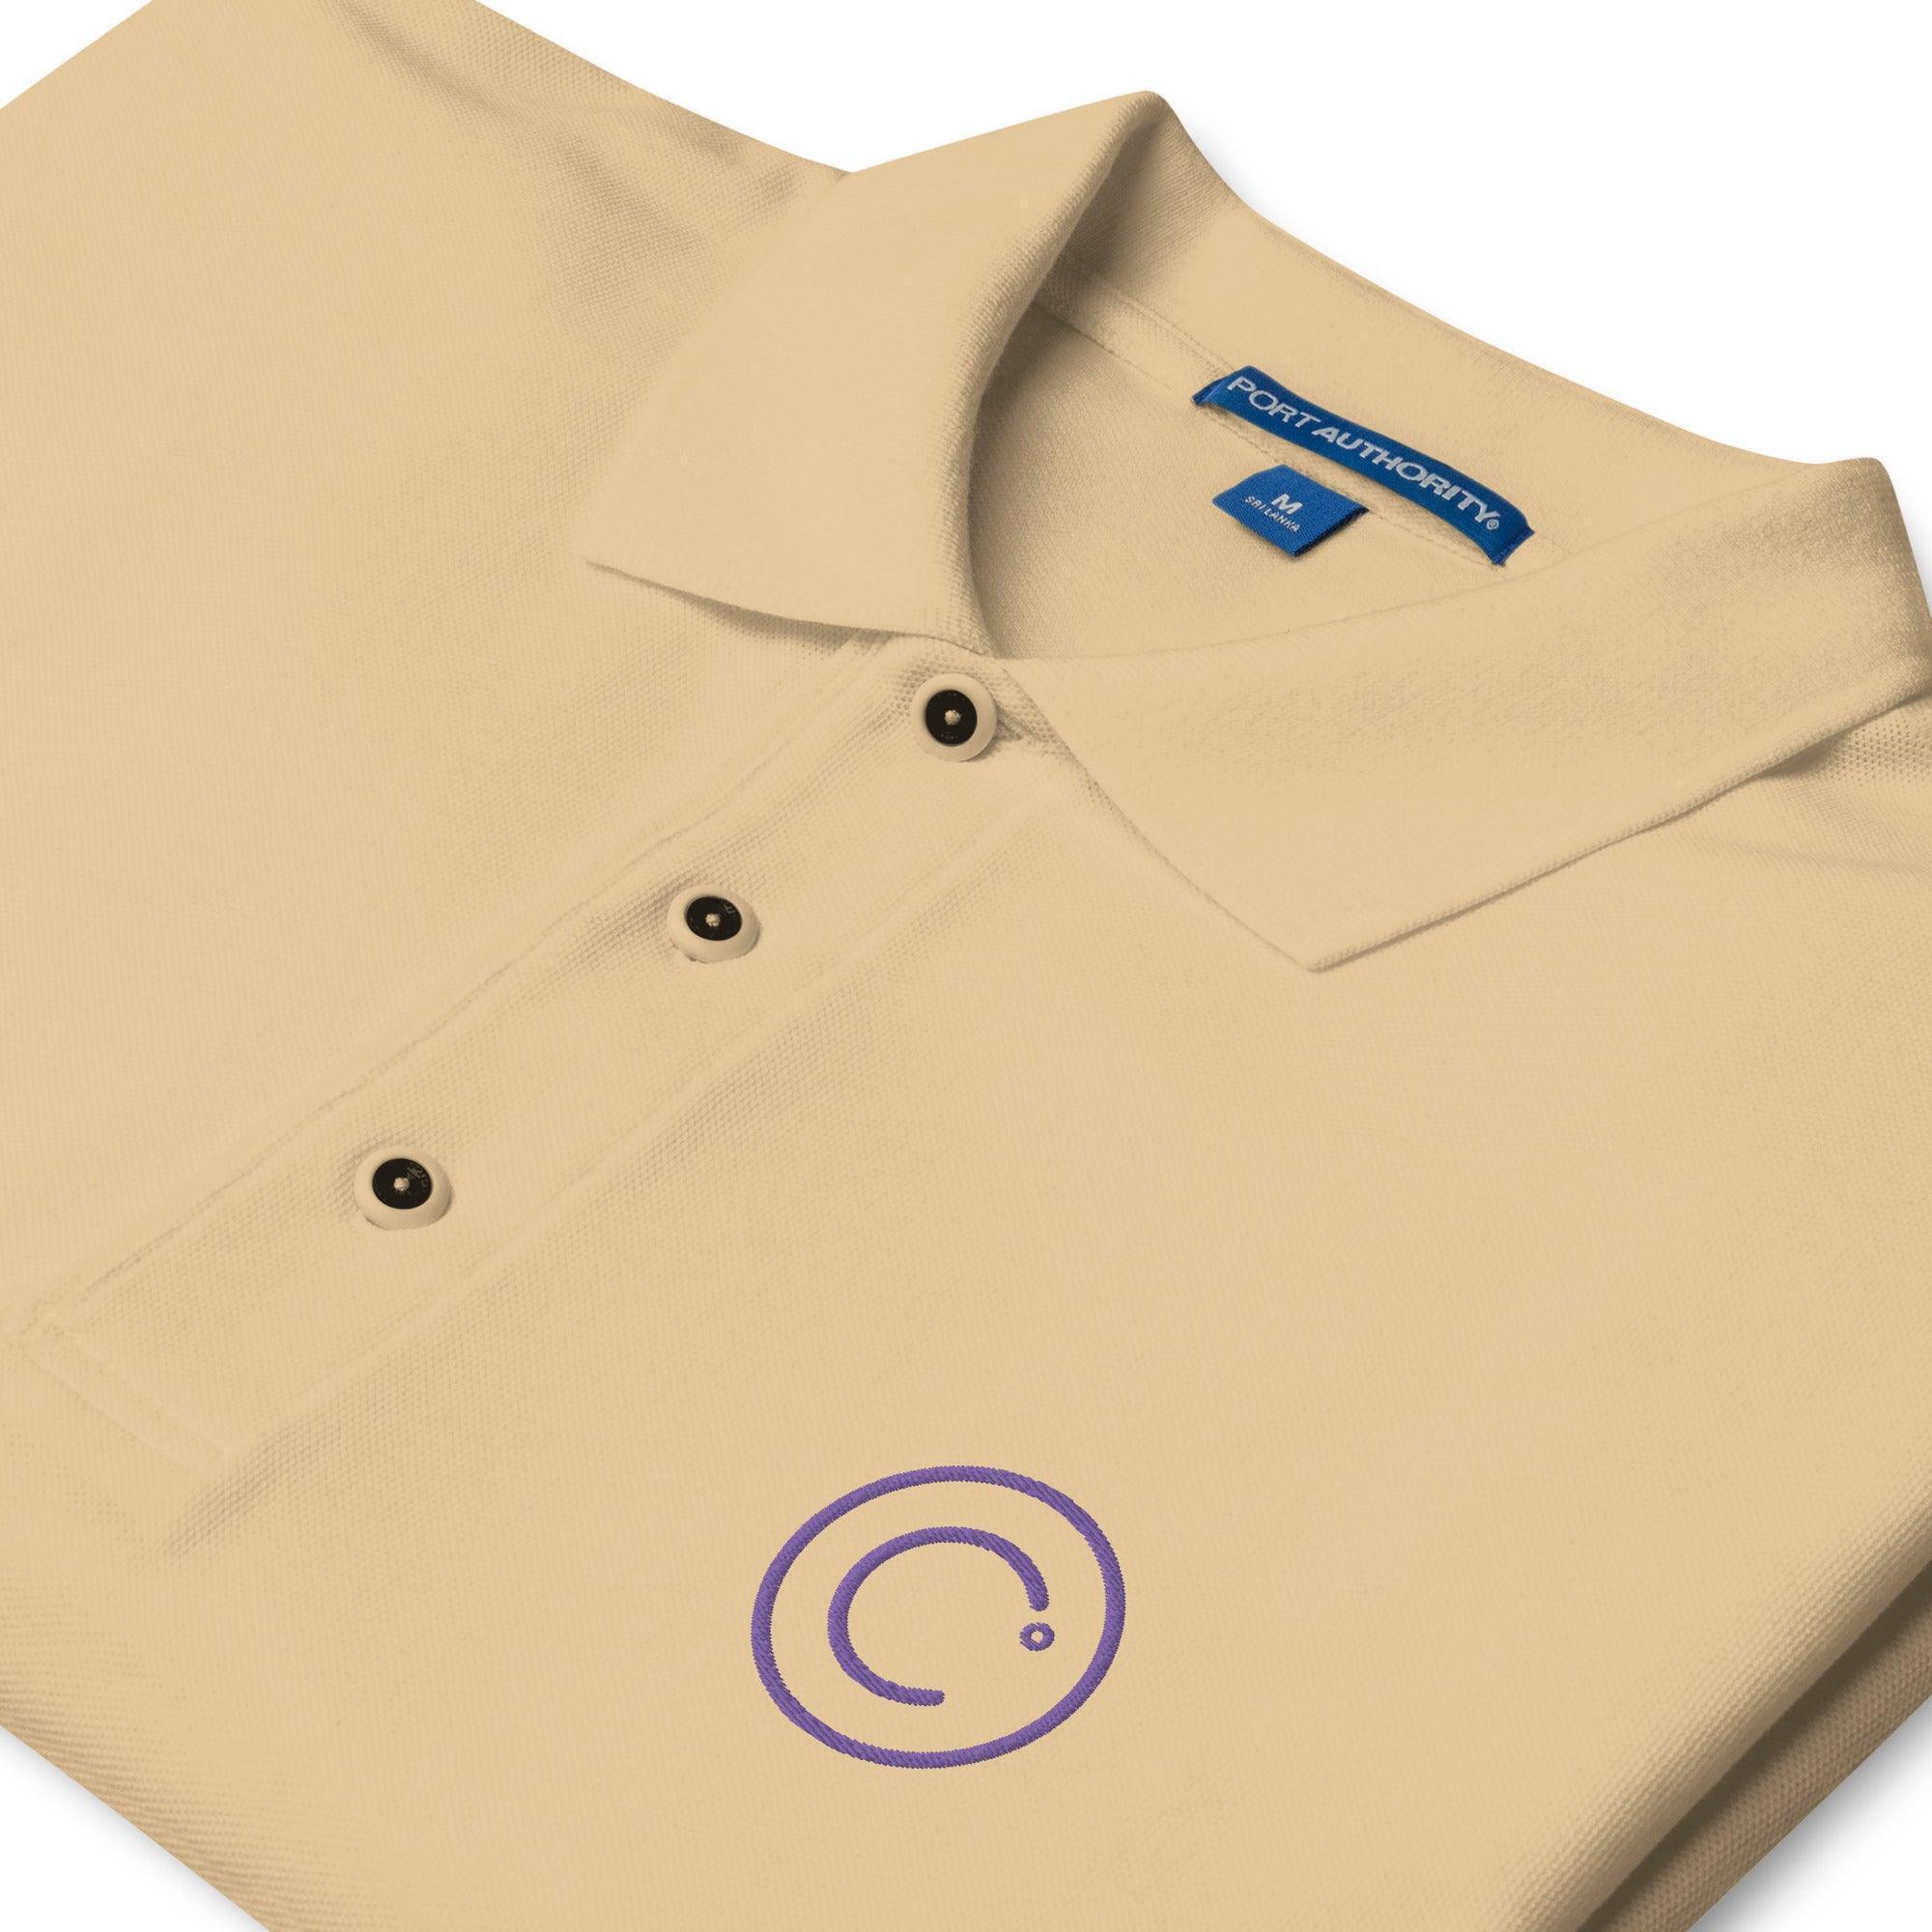 Celsius Polo Shirt - InvestmenTees